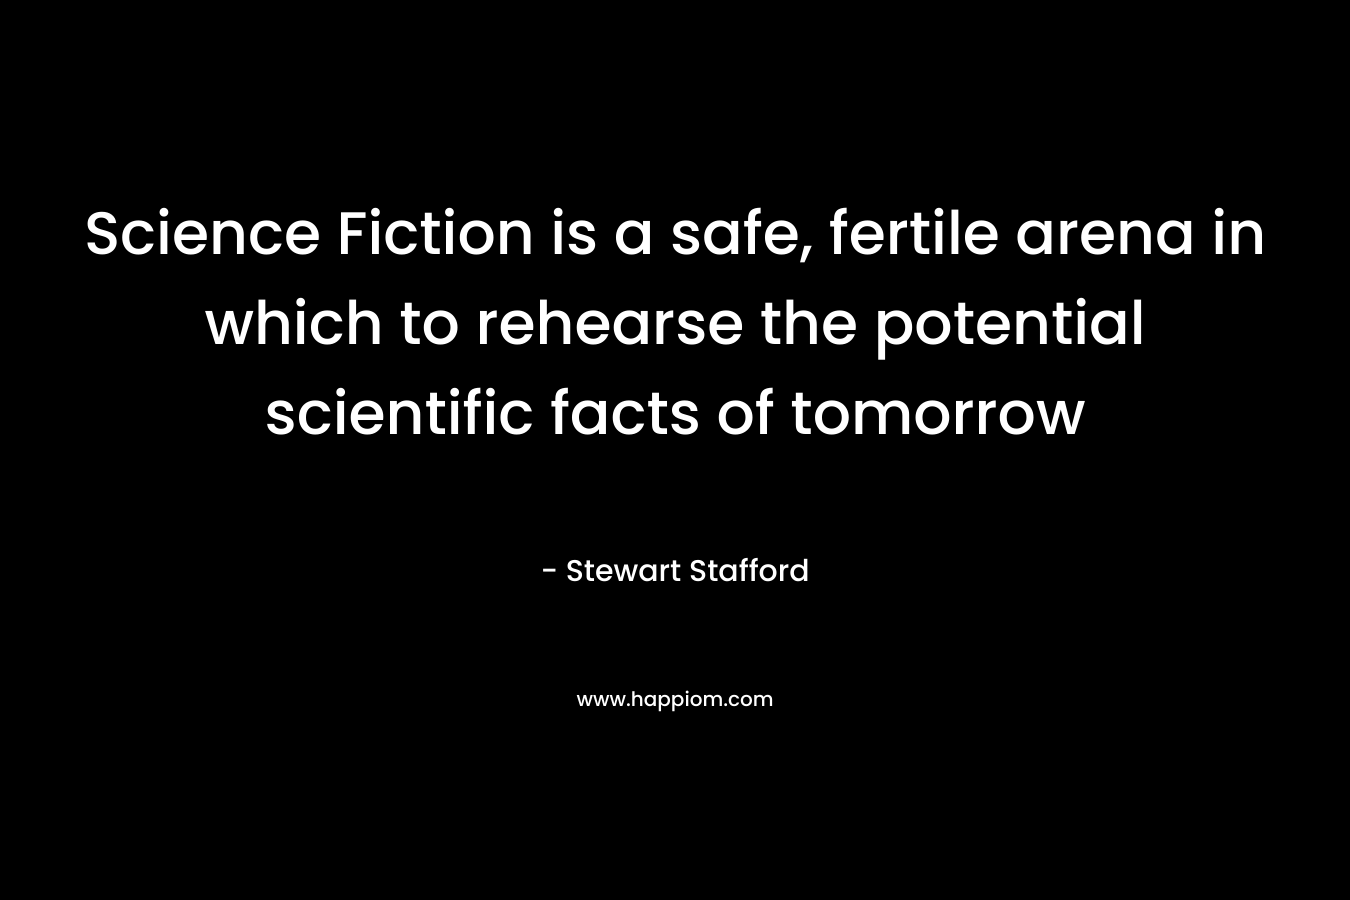 Science Fiction is a safe, fertile arena in which to rehearse the potential scientific facts of tomorrow – Stewart Stafford